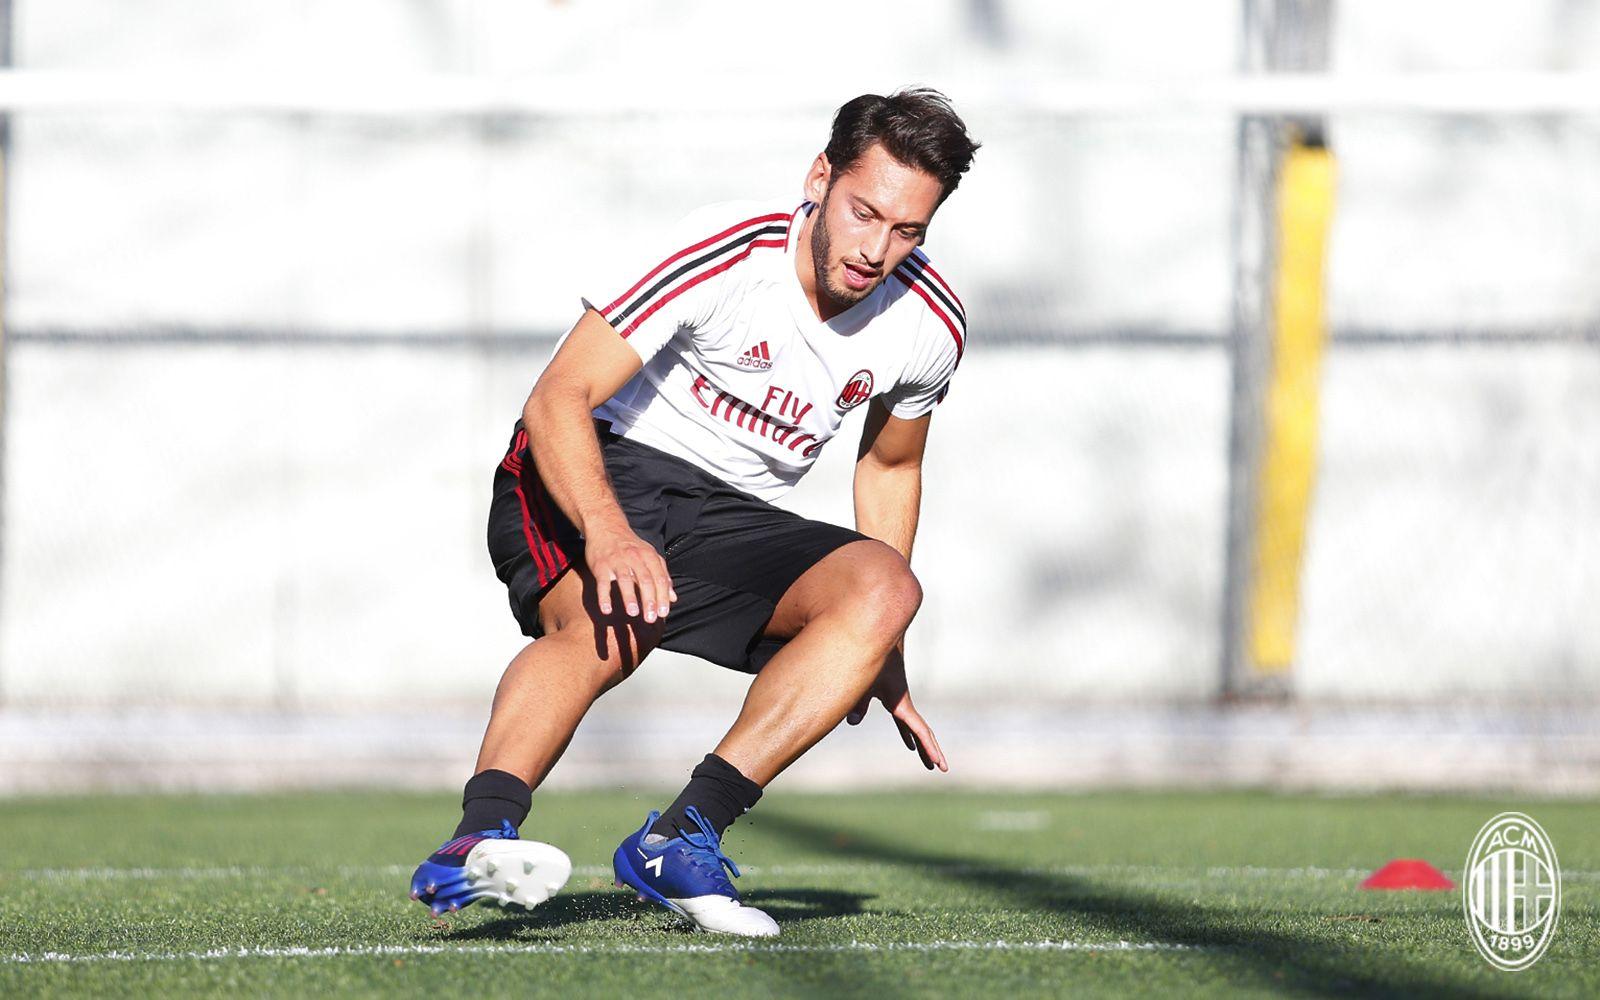 Official: calhanoglu is now red and black